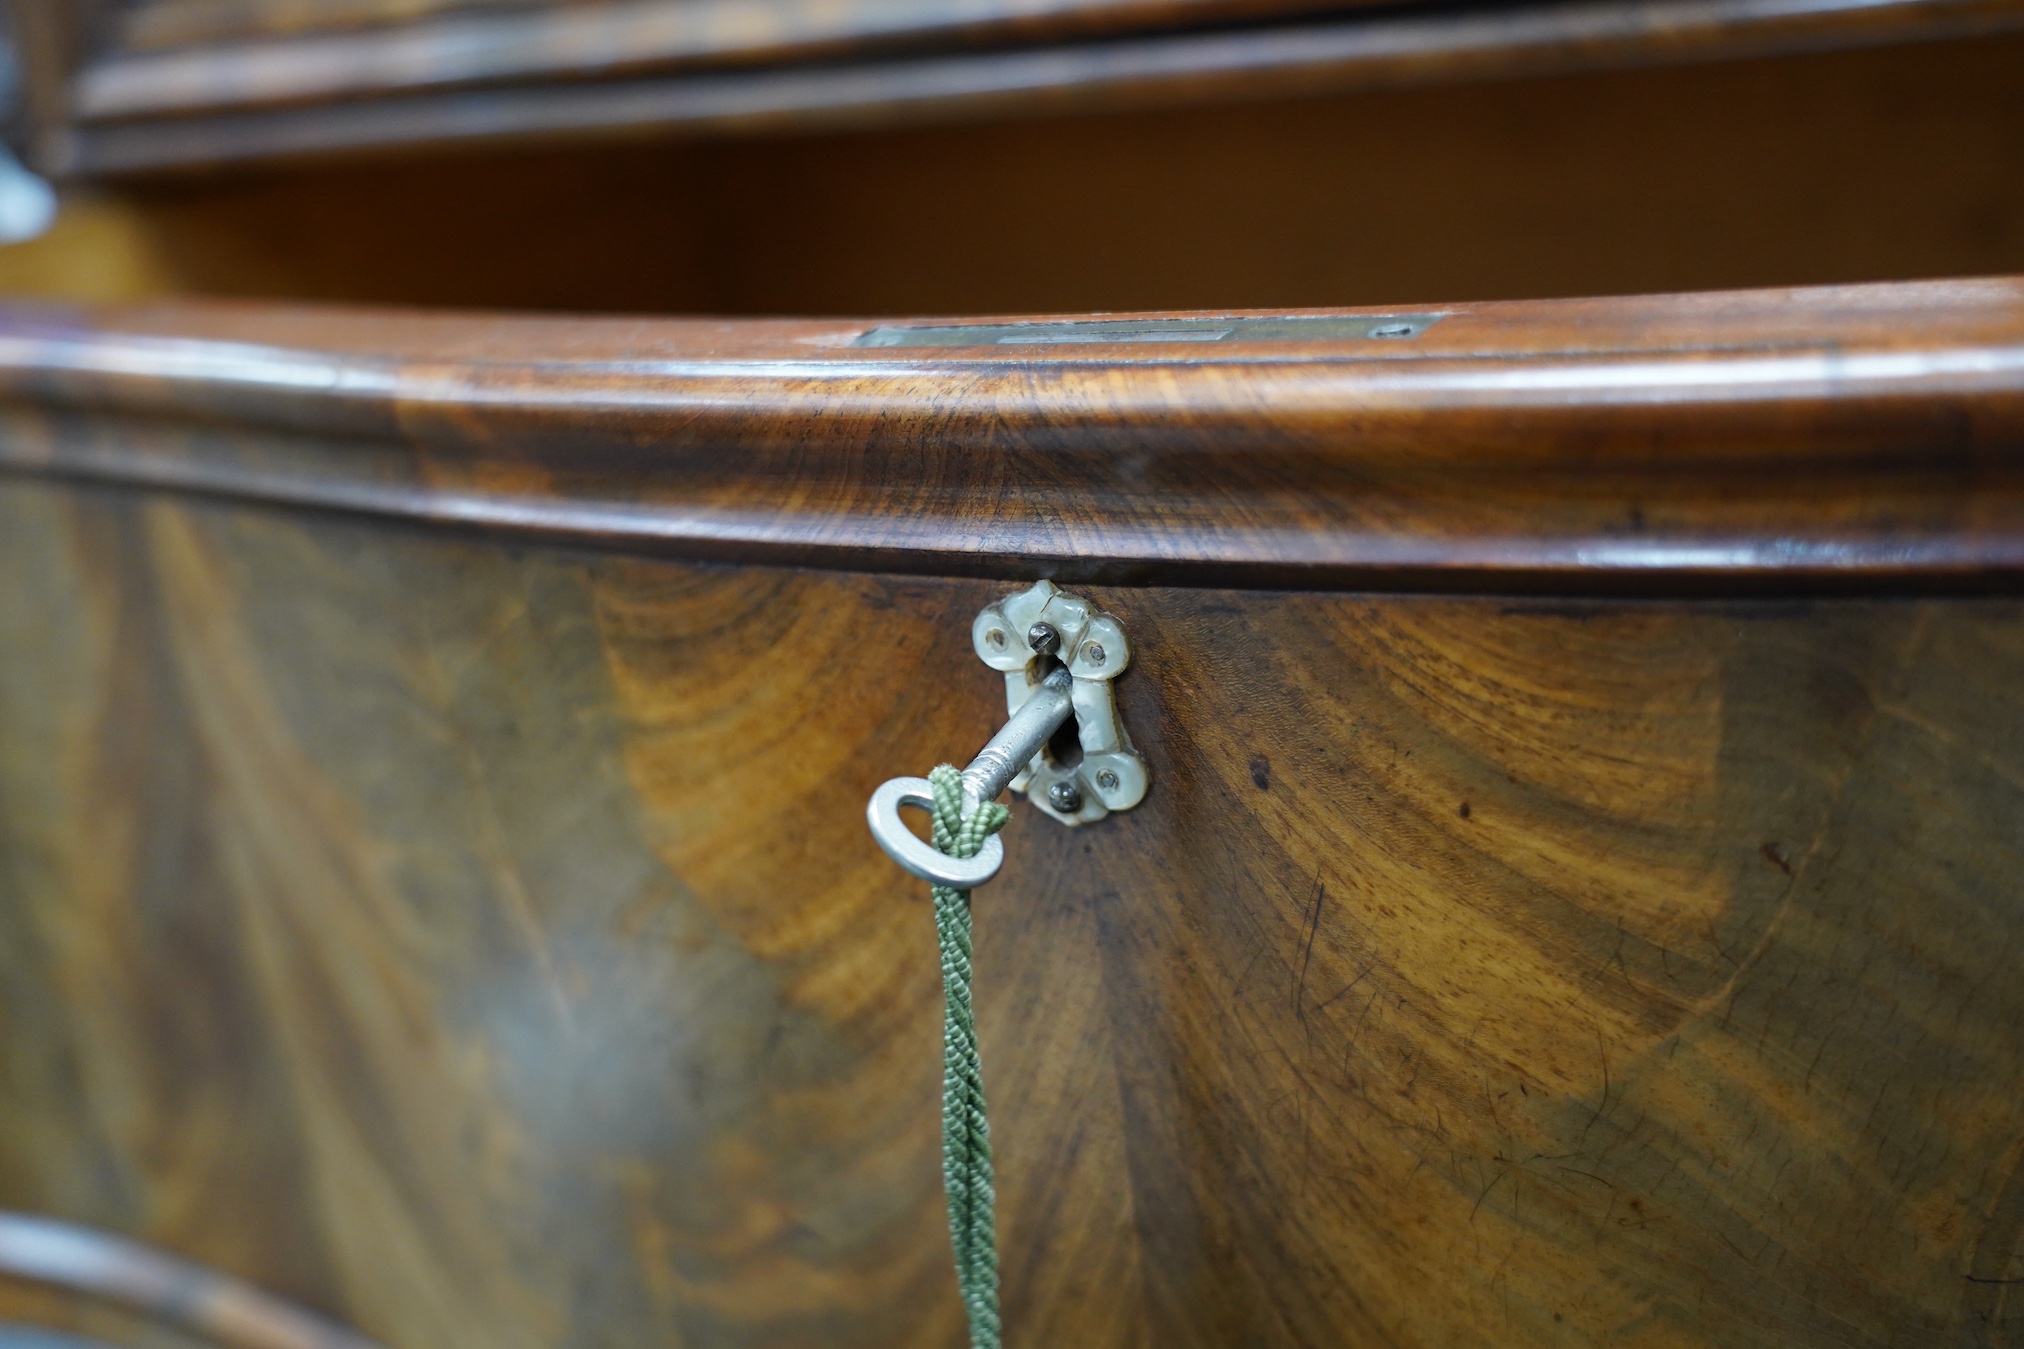 A 19th century French commode, width 96cm, depth 49cm, height 93cm. Condition - fair